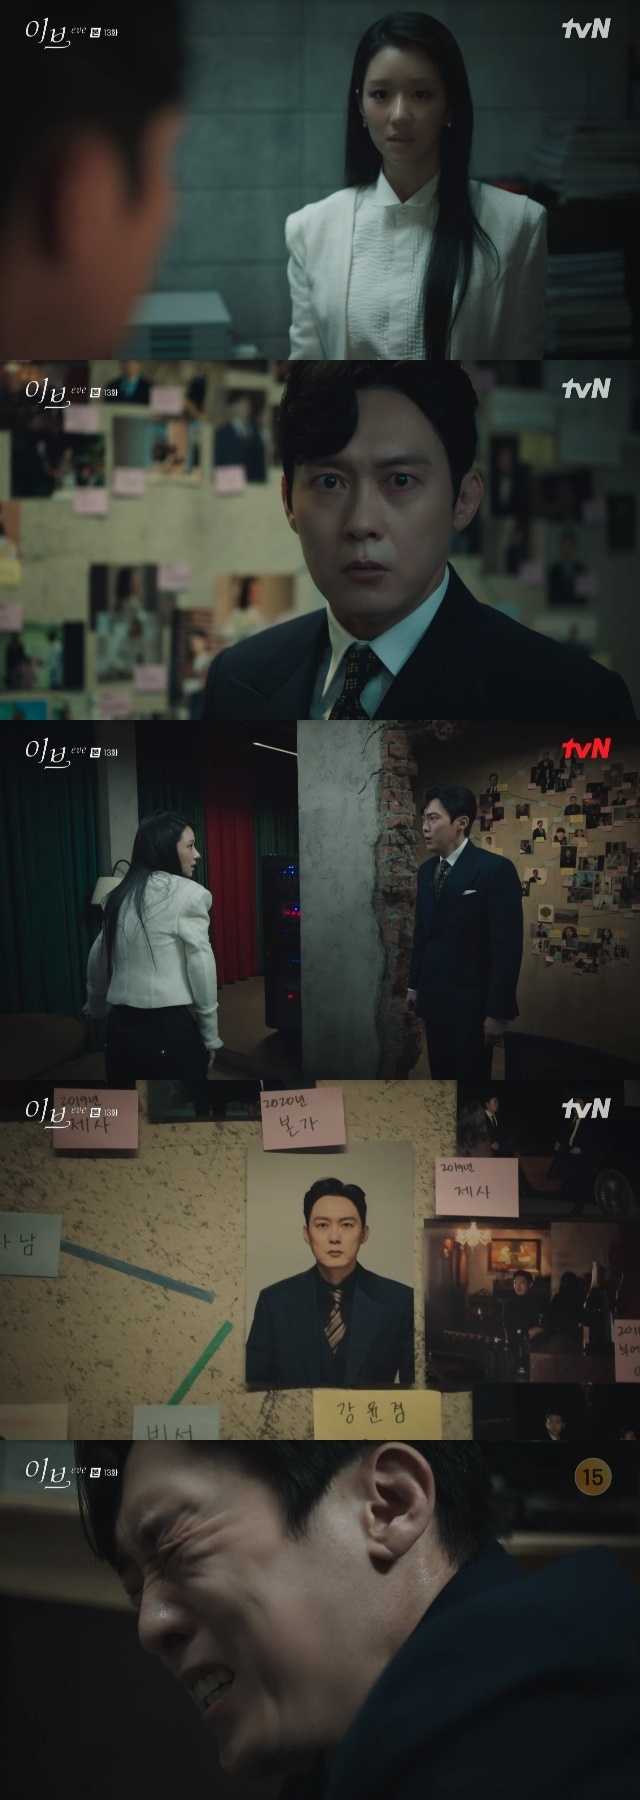 Byeong-eun Park was Furious for not having a planned approach with the intention of revenge of Seo Ye-ji.In the 13th episode of the TVN tree drama Eve (playplayed by Yoon Young-mi and directed by Park Bong-seop), which was broadcast on July 13, Kang Yoon-gyeom (Byeong-eun Park), who raises doubts about Lee Gelael (Seo Ye-ji), was portrayed.Kang Yoon-gyeom, who heard from Sora (Yoo Seon-min) that Lees real name and Jang Bo-ram were not his own daughters, fell into uncontrollable doubt.He then snuck behind Lee, who was absent from the company meeting again.Soon, however, he was caught tailing Seo Eun-pyeong (Lee Sang-yeob).Seo Eun-pyeong revealed that he was attacked by Kang Yoon-gum to protect the Sean Gelael, and pretended to suspect Kang Yoon-gum behind the perpetrator.Do you love Sean Gelael? asked Kang Yoon-kyum, How is the love of Kang? My love is sacrifice.I do not see a man who suspects, follows, but says love as a competitor. I am sure that Sunbin will not be next to him soon. Kang Yoon-gyeom, who awakened to this, eventually doubted this Sean Gelael but decided to listen to what she wanted.I watched this Sean Gelael put his hand on the secret Safe door lock on CCTV, and he called me deliberately and told me the password he changed, Give me the box with the ribbon in Safe.This Sean Gelael secured the original version of the Jeddix Samsung Electronics merger agreement that he wanted.At this time, Sora came into Kang Yoon-kyums chairmans office and directly revealed, I was approached with my mother and approached her deliberately. I am against us.But Kang Yun-gyeom said, You never loved me, did you? Ive overcome 10 million reasons why I shouldnt love Sun Bin, but Ive got everything I need.You should give up now for you, too, he said bitterly.Kang then showed Lee the new house and handed over the transfer of shares and suggested that we start here again.Eve if there is something I can not tell you, it does not matter to me at all.Lee Sean Gelael did not stop revenge while shed tears when she learned that Kang Yoon-gum gave her her own safety.However, Lee Sean Gelael wanted to tell Kang Yoon-gyeom everything in my mouth.The wind of Sean Gelael did not come true.Lee Sean Gelael threatened to send Jang Moon-hee back to midnight the next day, noting that Han Sora was not only the presence of the inner son but also that she was the real behind the Seo Eun-pyeong raid.However, the situation was twisted when a single-panel (National Hwan), who learned of the lawsuit of the LY victims regiment, learned about Jang Moon-hees existence.Han Pan-ro took Jang Moon-hee, who Han Sora had kidnapped through Moon Do-wan (Cha Ji-hyuk), and locked him in.For a while, Jang Mun-hee sent his GPS information to Lee Sean Gelael, who hid in a secret place of the dance institute to save Jang Mun-hee.In the meantime, Kang Yoon-kyum, who learned about Jang Mun-hees lawsuit, found out that Lee Sean Gelael had taken out the original version of the Jeddix Samsung Electronics merger contract and found out where he was.Soon, Kang Yoon-gyeom, who visited the dance academy of Sean Gelael, stepped into the secret place of Sean Gelael and found a picture of himself and his surrounding characters on the wall.Kang Yoon-kyum later told this Sean Gelael, who appeared behind him, How can you do this to me? I can not be so careful and cruel.When did you get ready to approach me? I thought you needed money. This is terrible. You should have greeded for something else.I can give you everything. I can do anything for you. Why did you do it to me? Kang Yoon-kyum said, Did you want to trample my life? I did something wrong with you. You put a knife in my heart.Then, after seeing this painful Sean Gelael, he seemed to regret it for a while, and soon he realized that he was betrayed again.